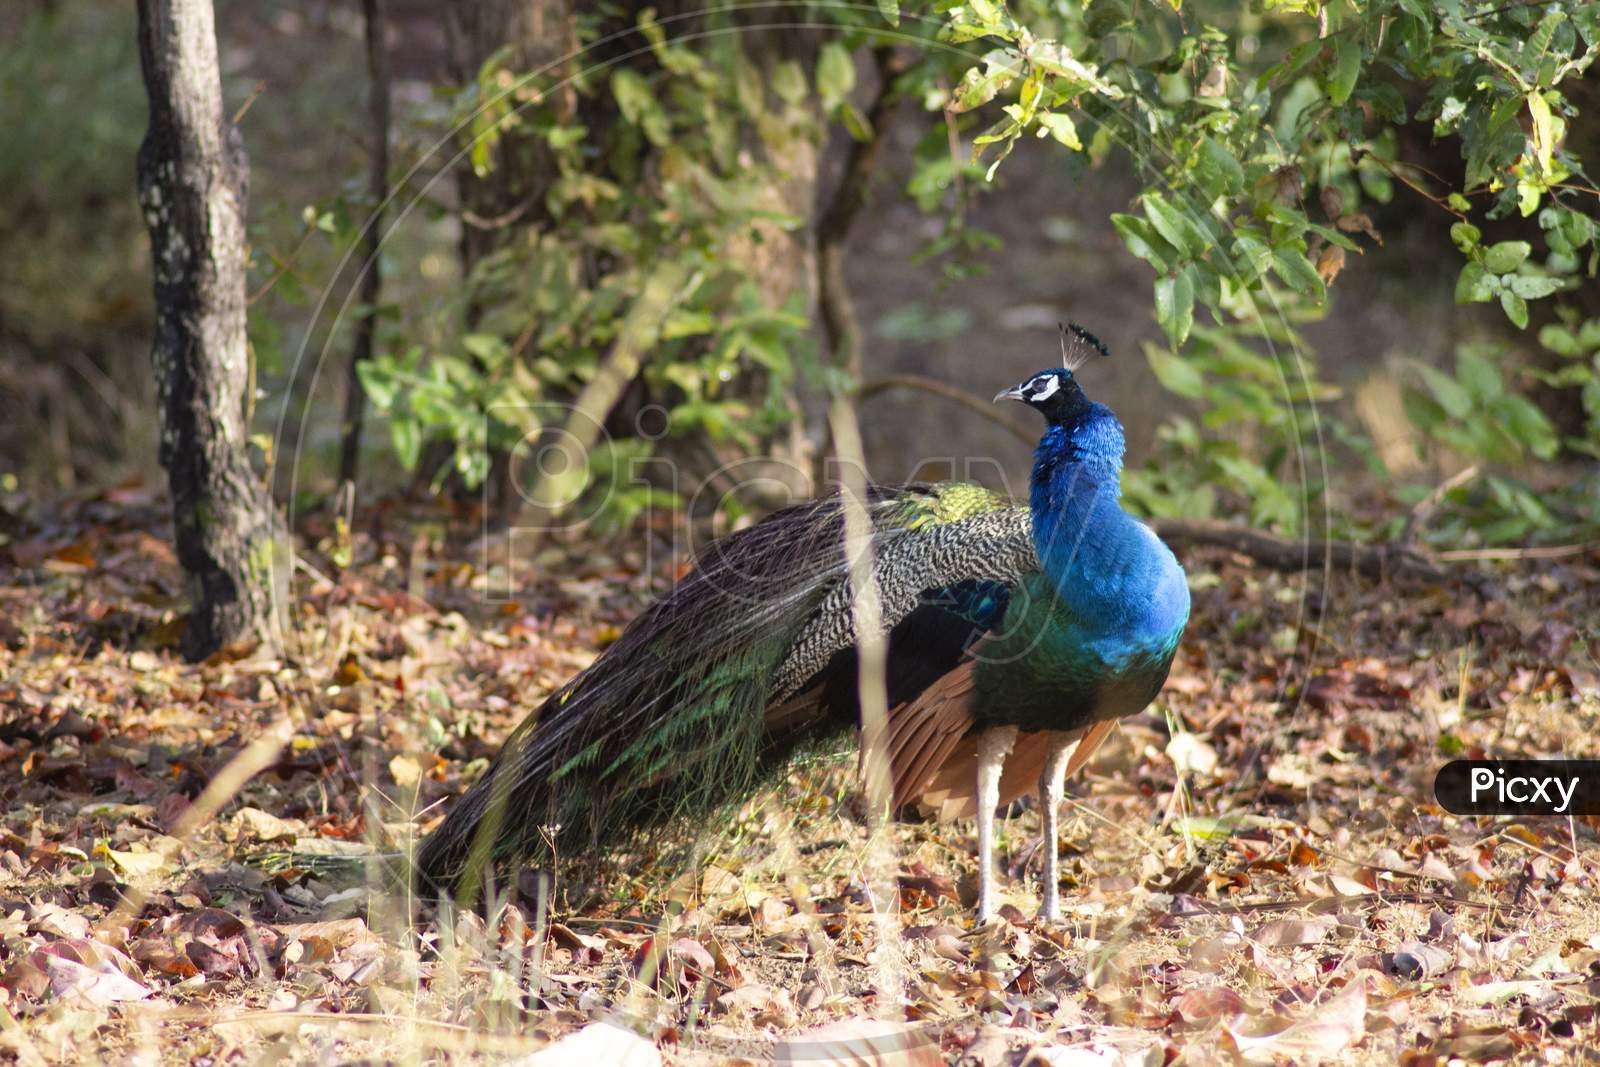 Indian Peacock on grass